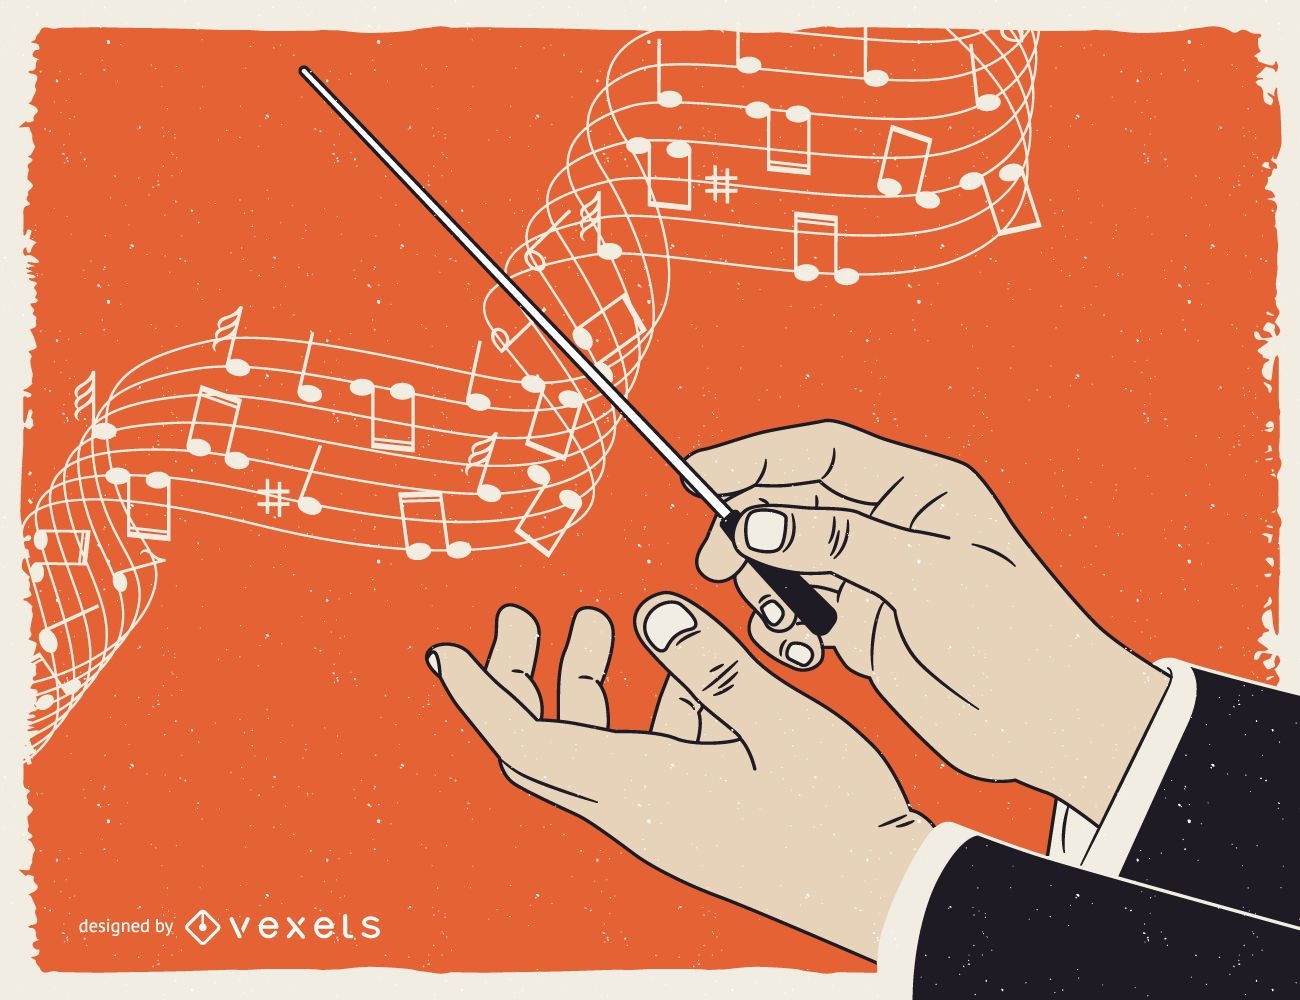 Illustrated classical music director